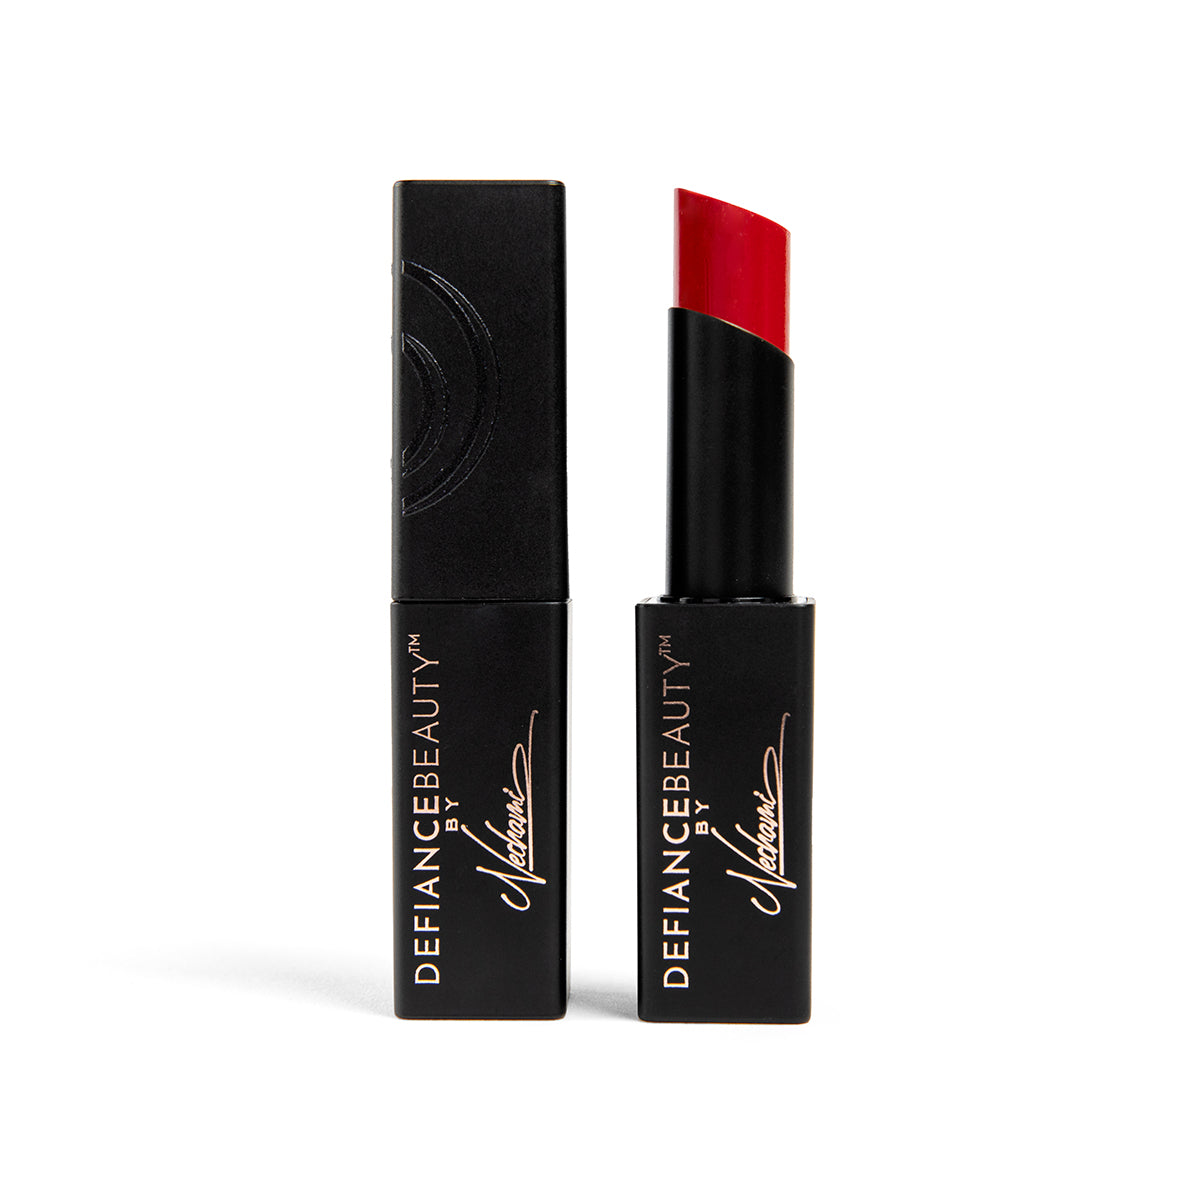 Fearless Age-Defying Lipstick *PREORDER ships 12/12*